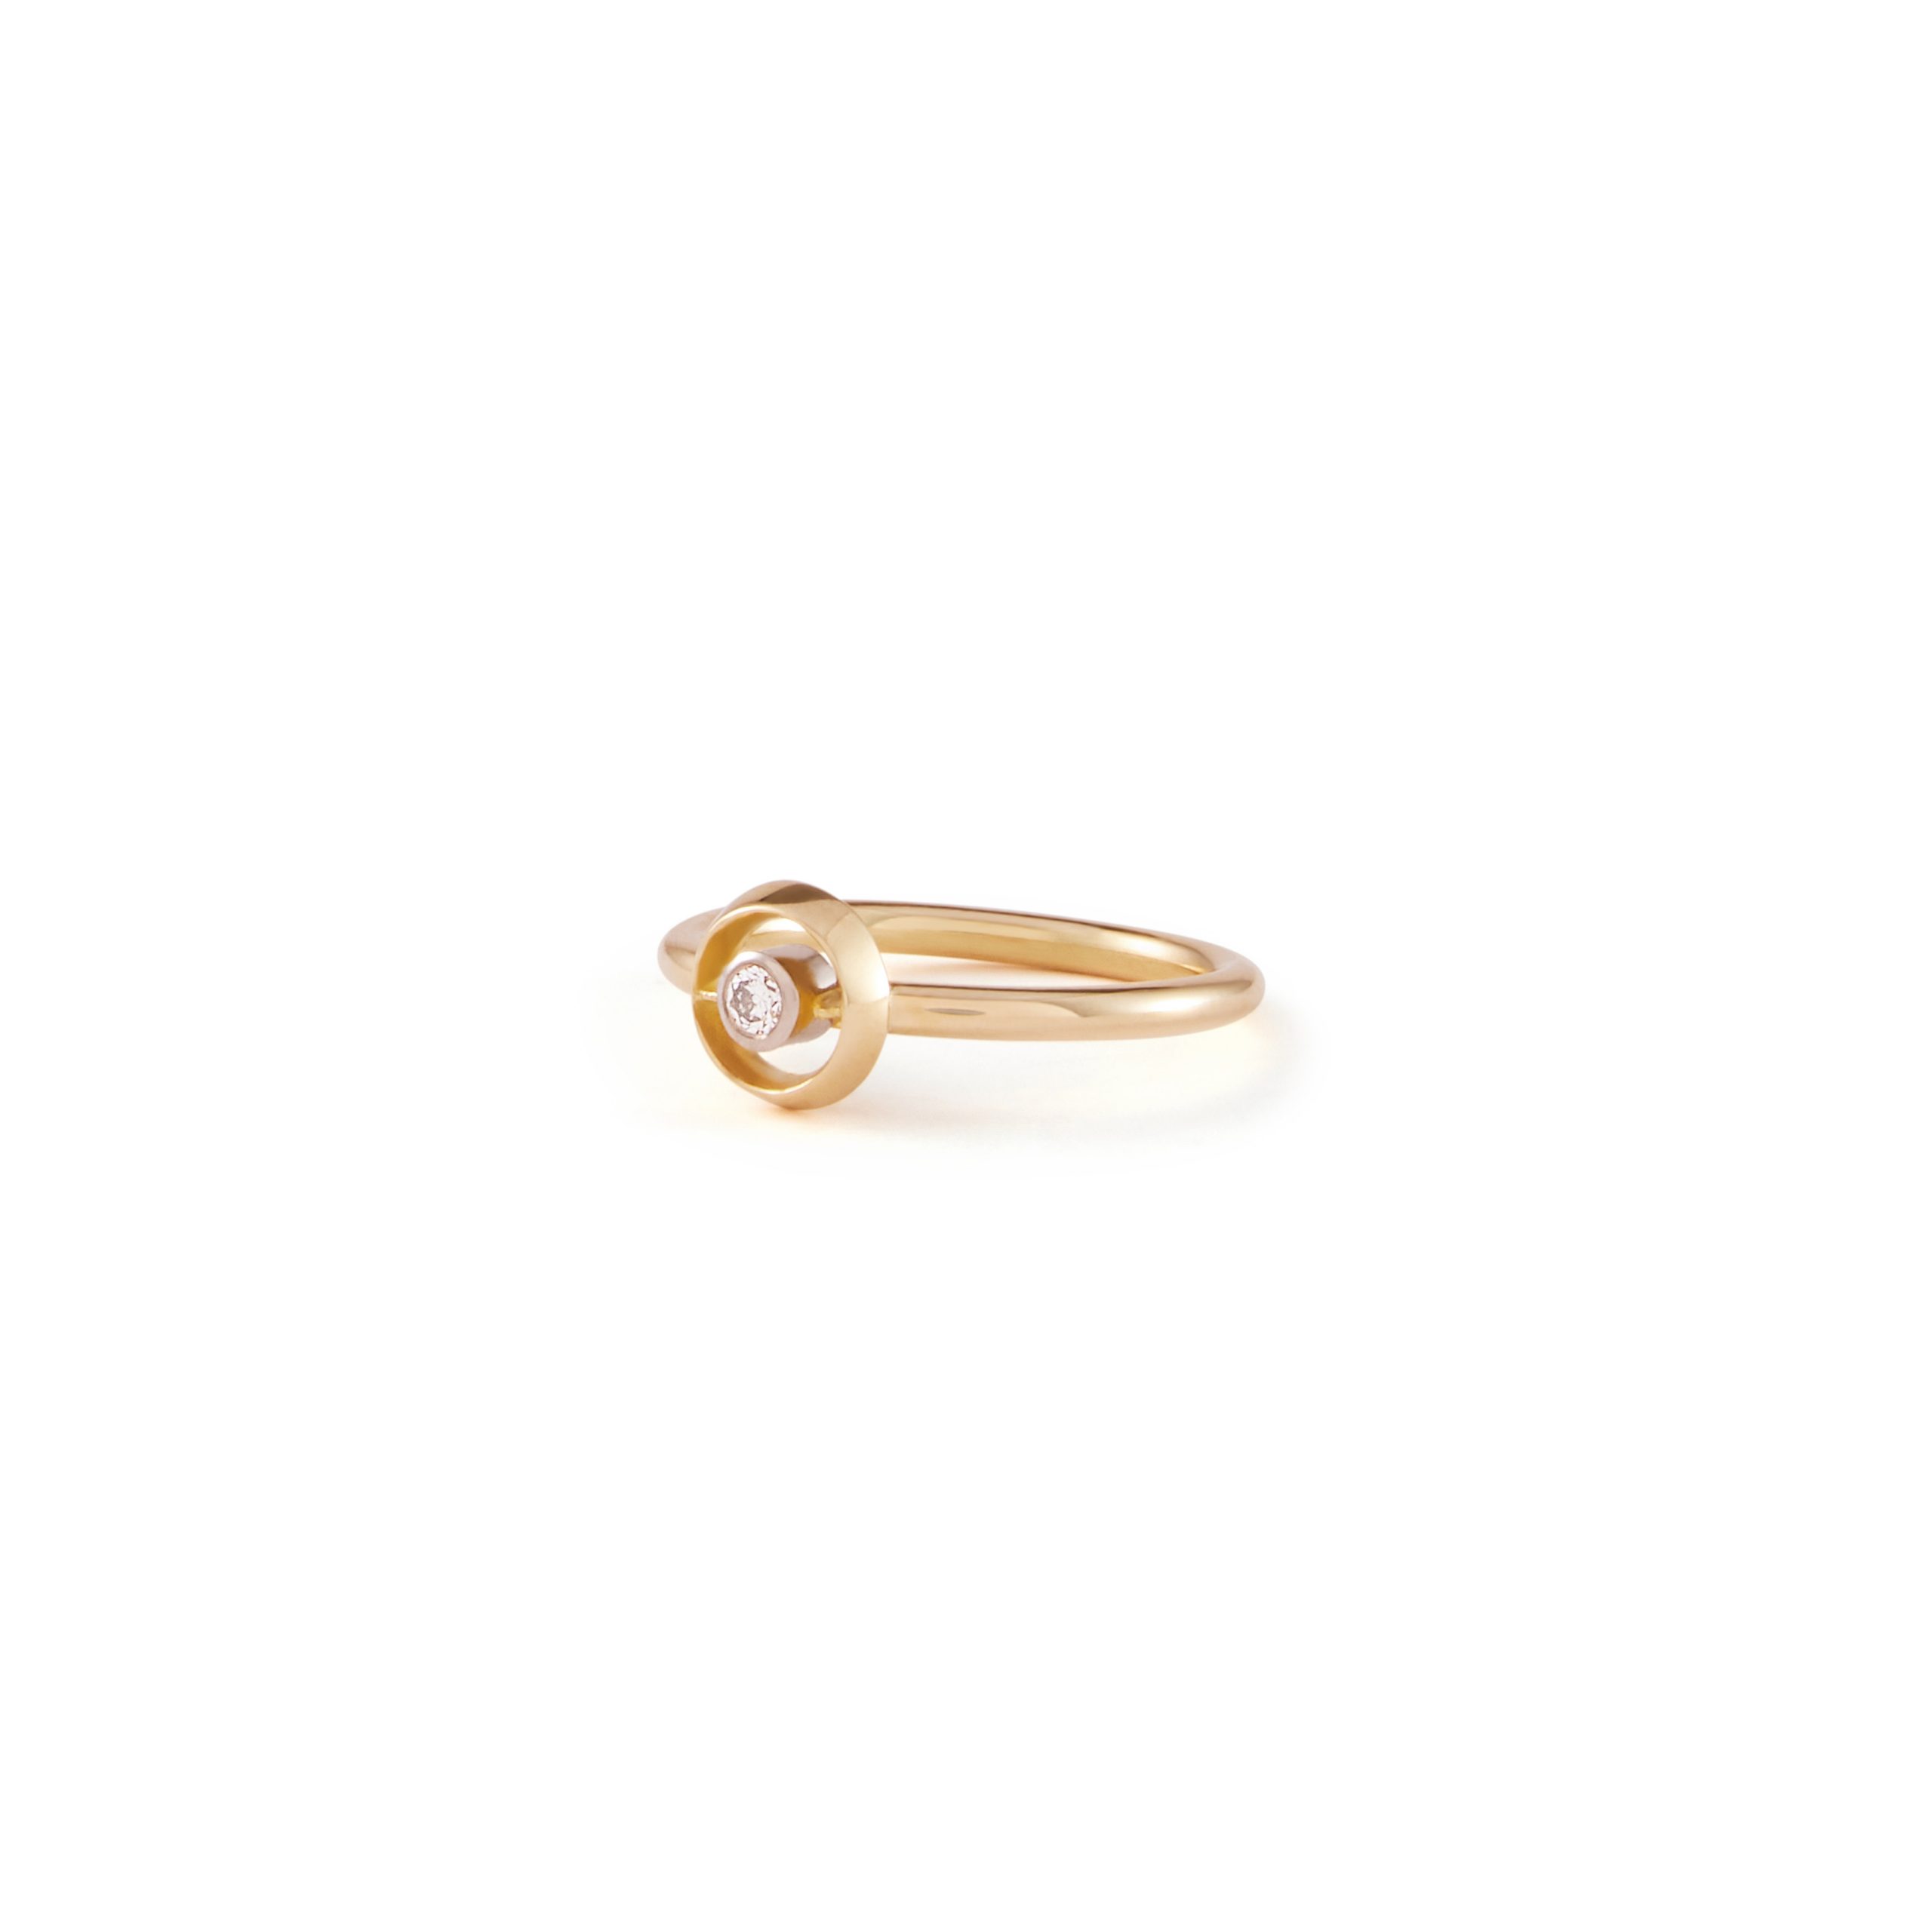 18ct Yellow Gold and Diamond Halo Dress Ring. - Lind Jewellery Design